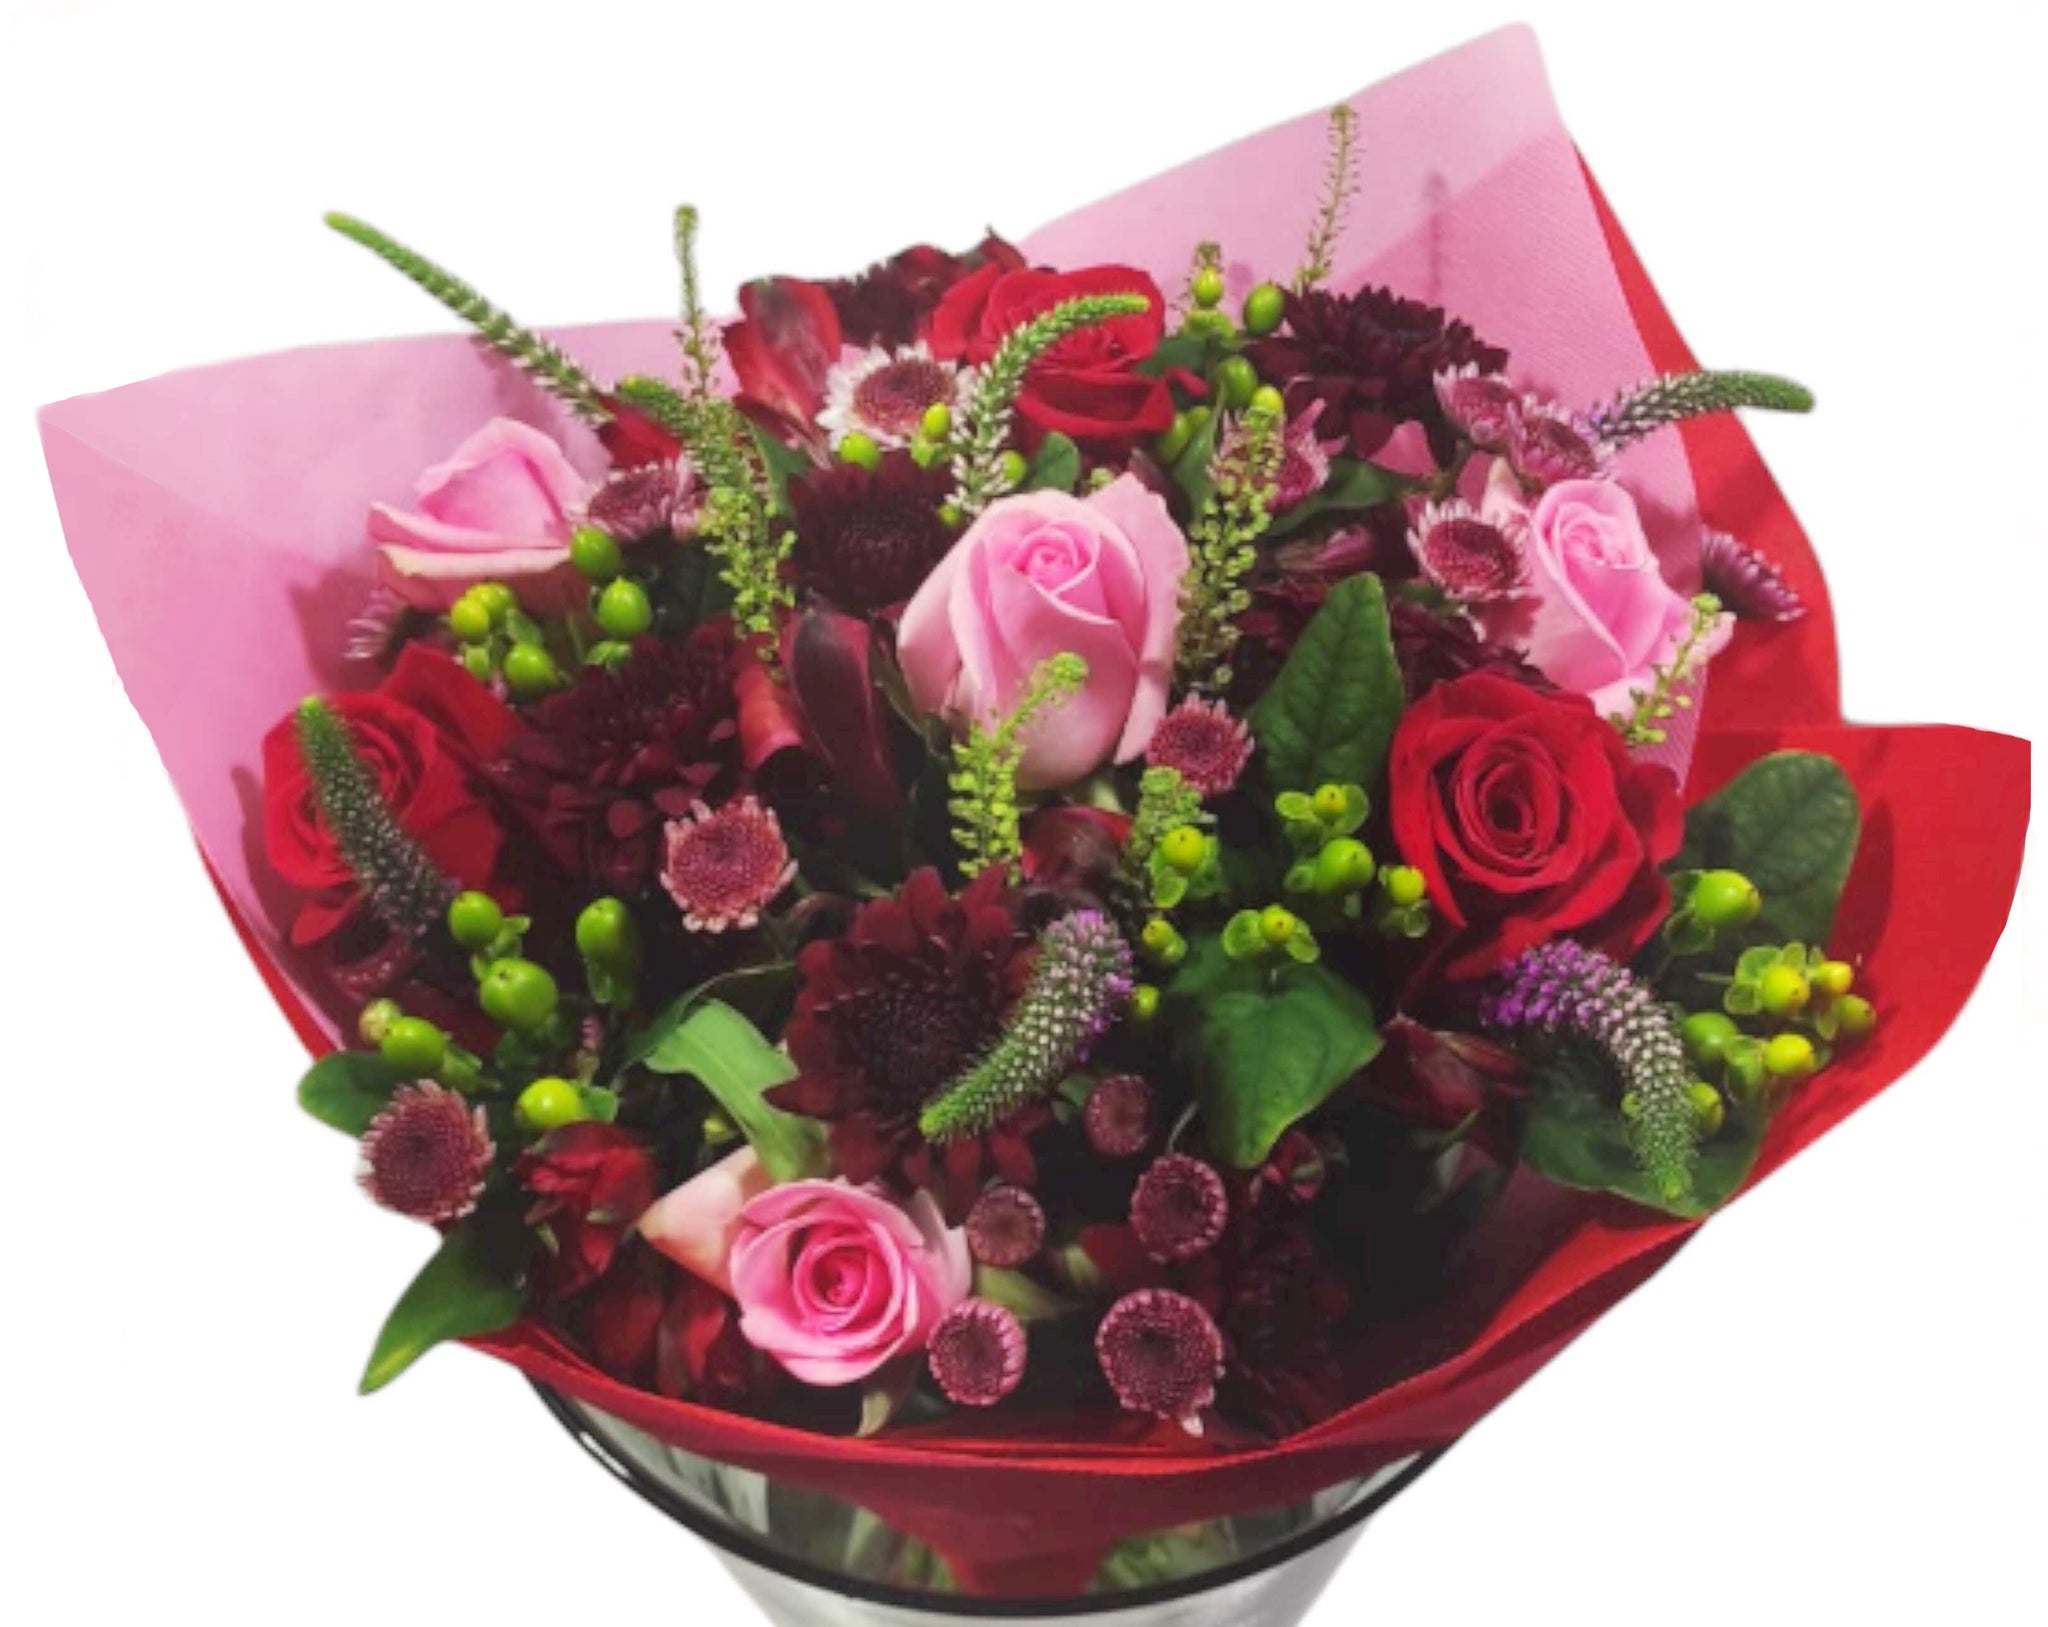 Comprised of red and pink roses, burgundy chrysanthemums, veronicas, hypericum and many other varieties, Flirt And Fun by Flower Co. is the ideal gift to celebrate romantic occasions. You will always be remembered!